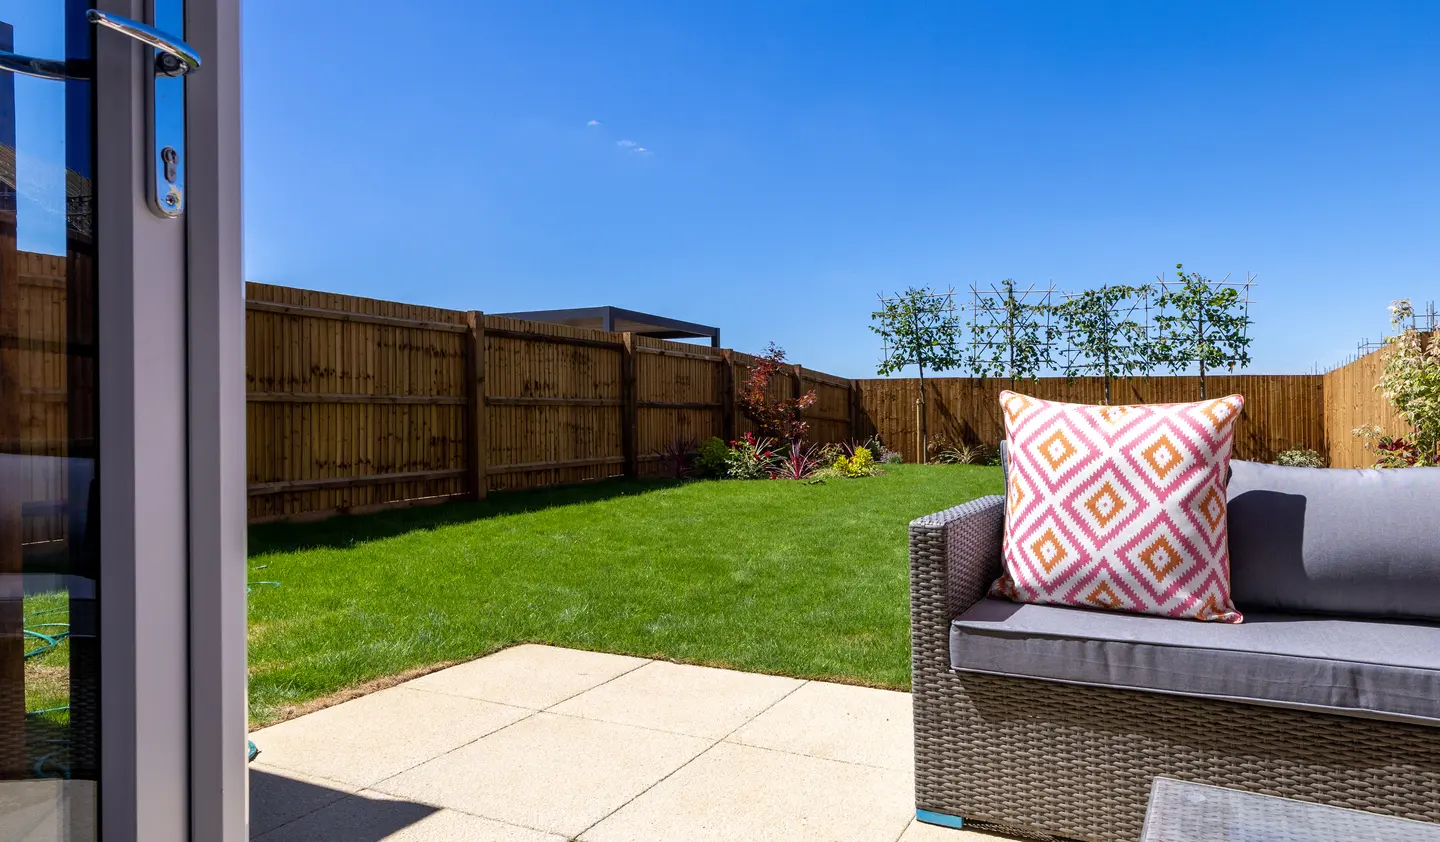 Durkan home garden with lawn, paved area and outdoor seating